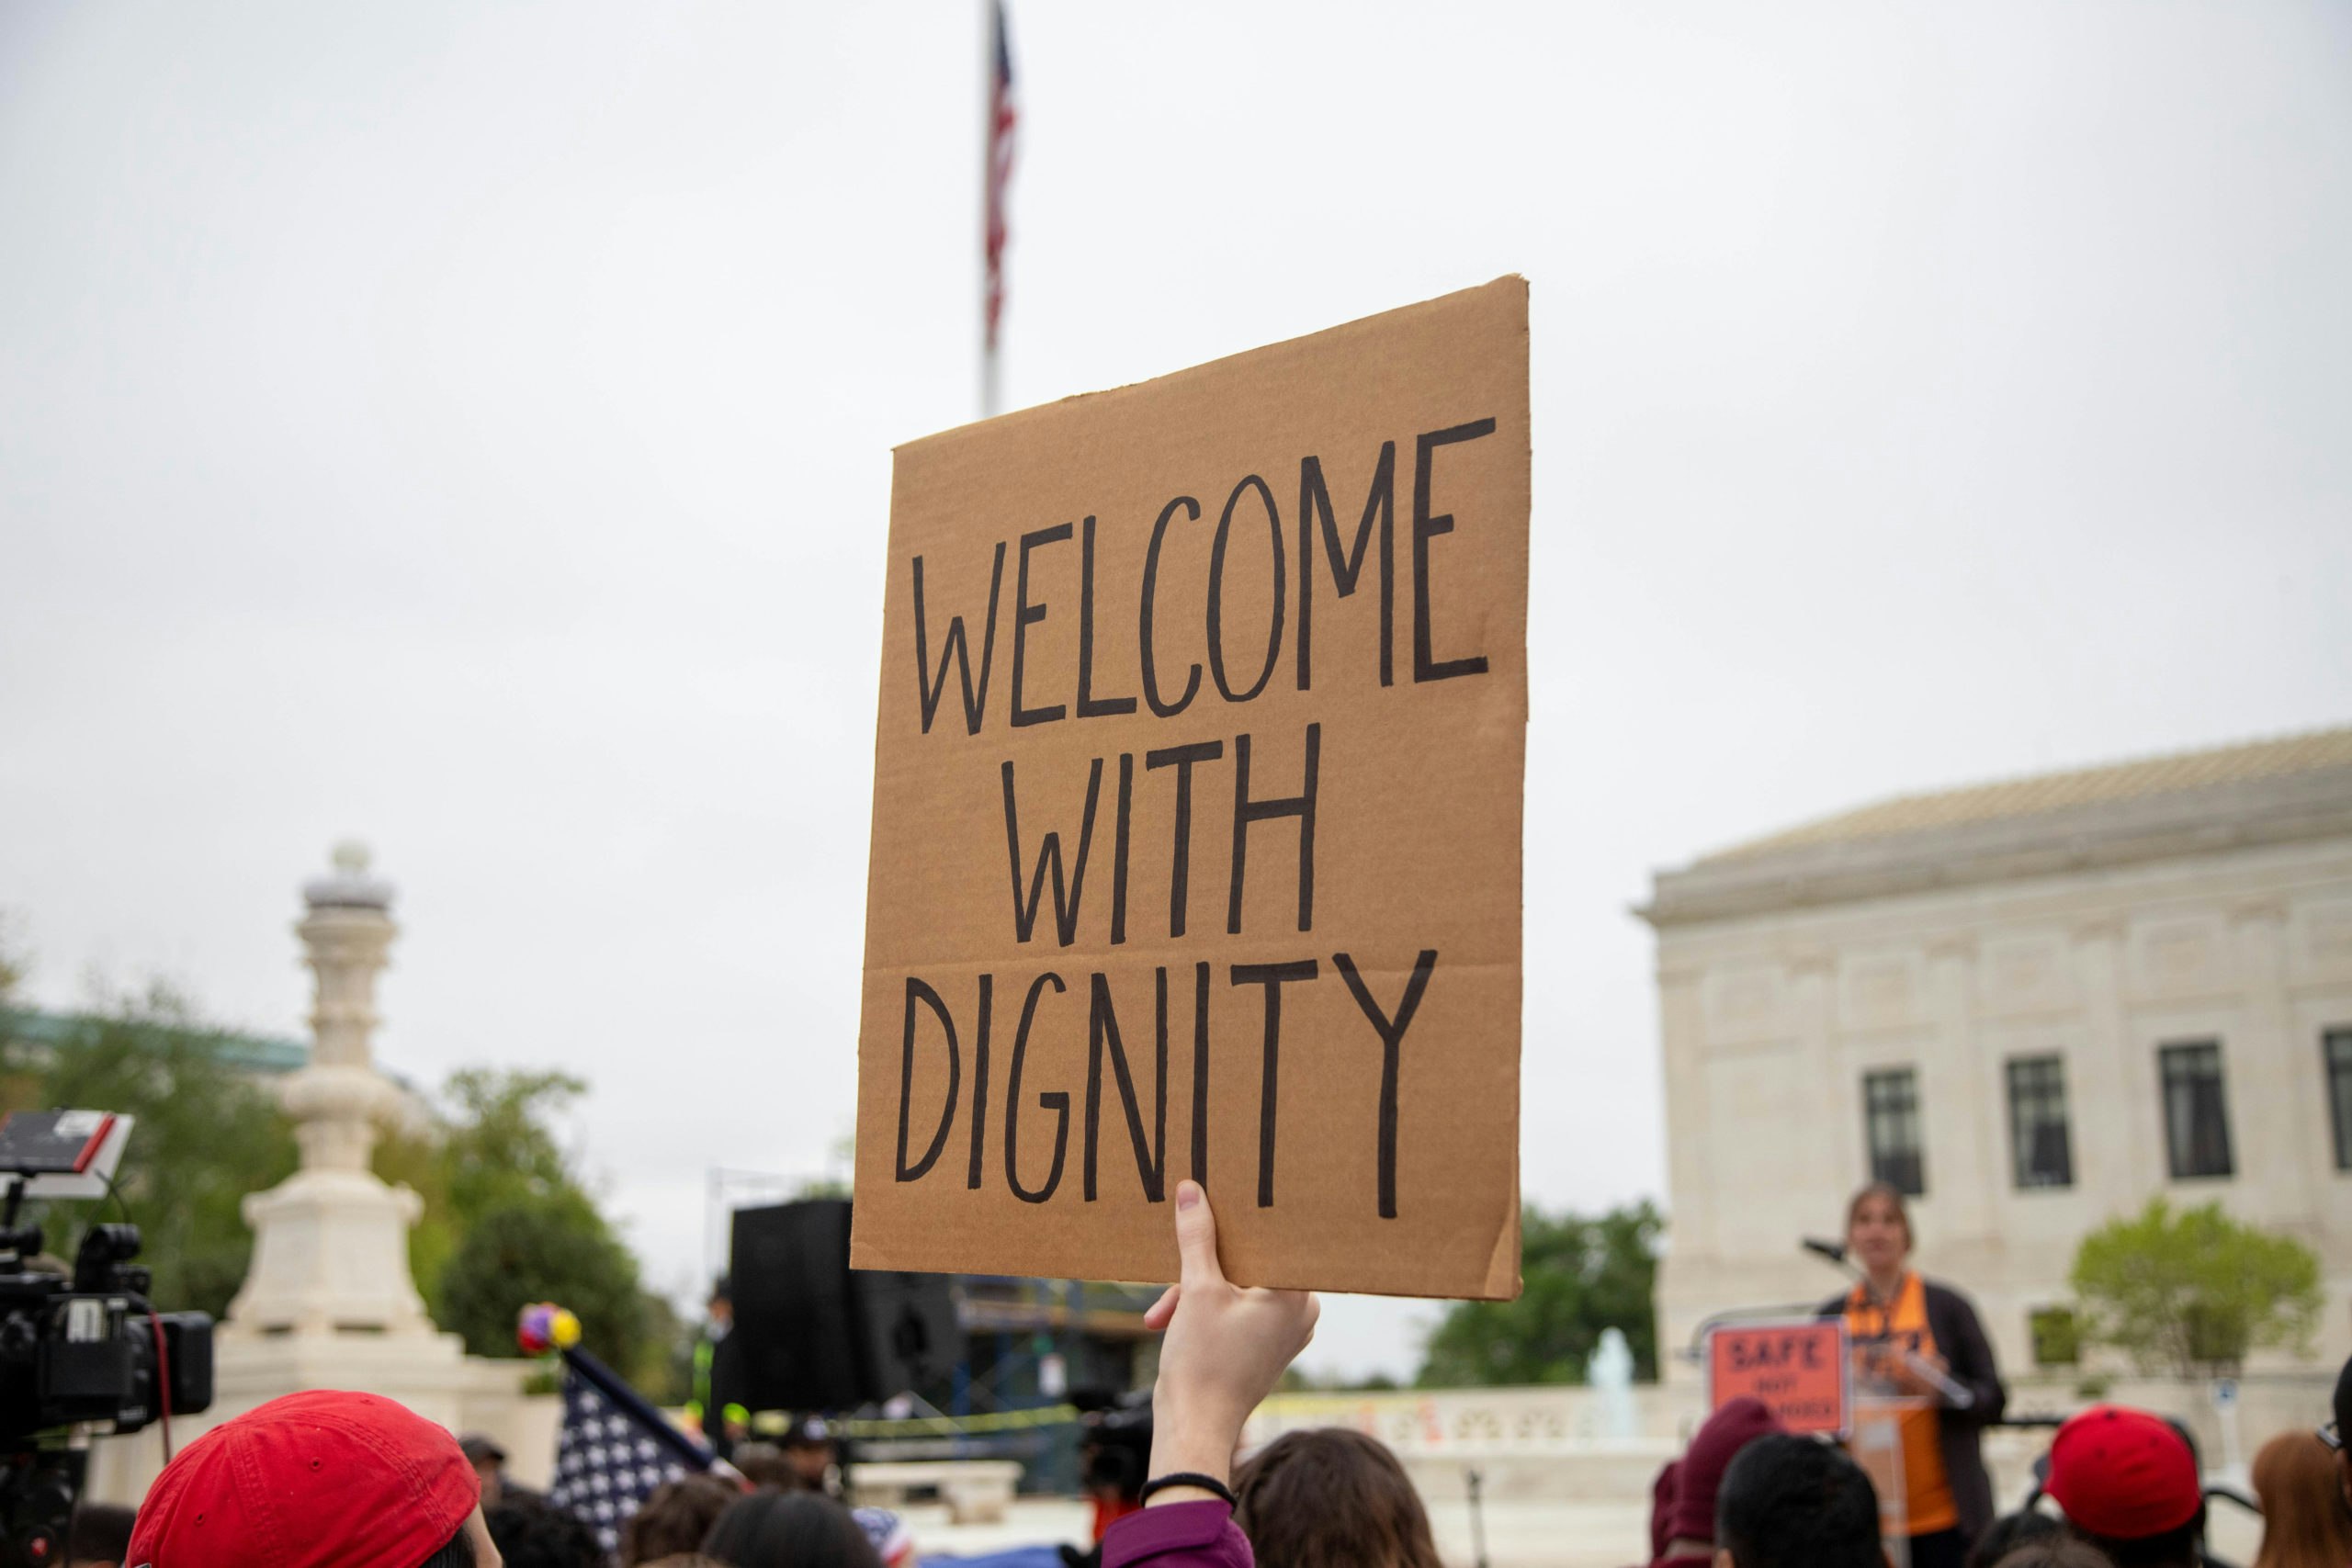 A "Welcome with Dignity" cardboard sign is being held up at the Safe Not Stranded rally at the Supreme Court